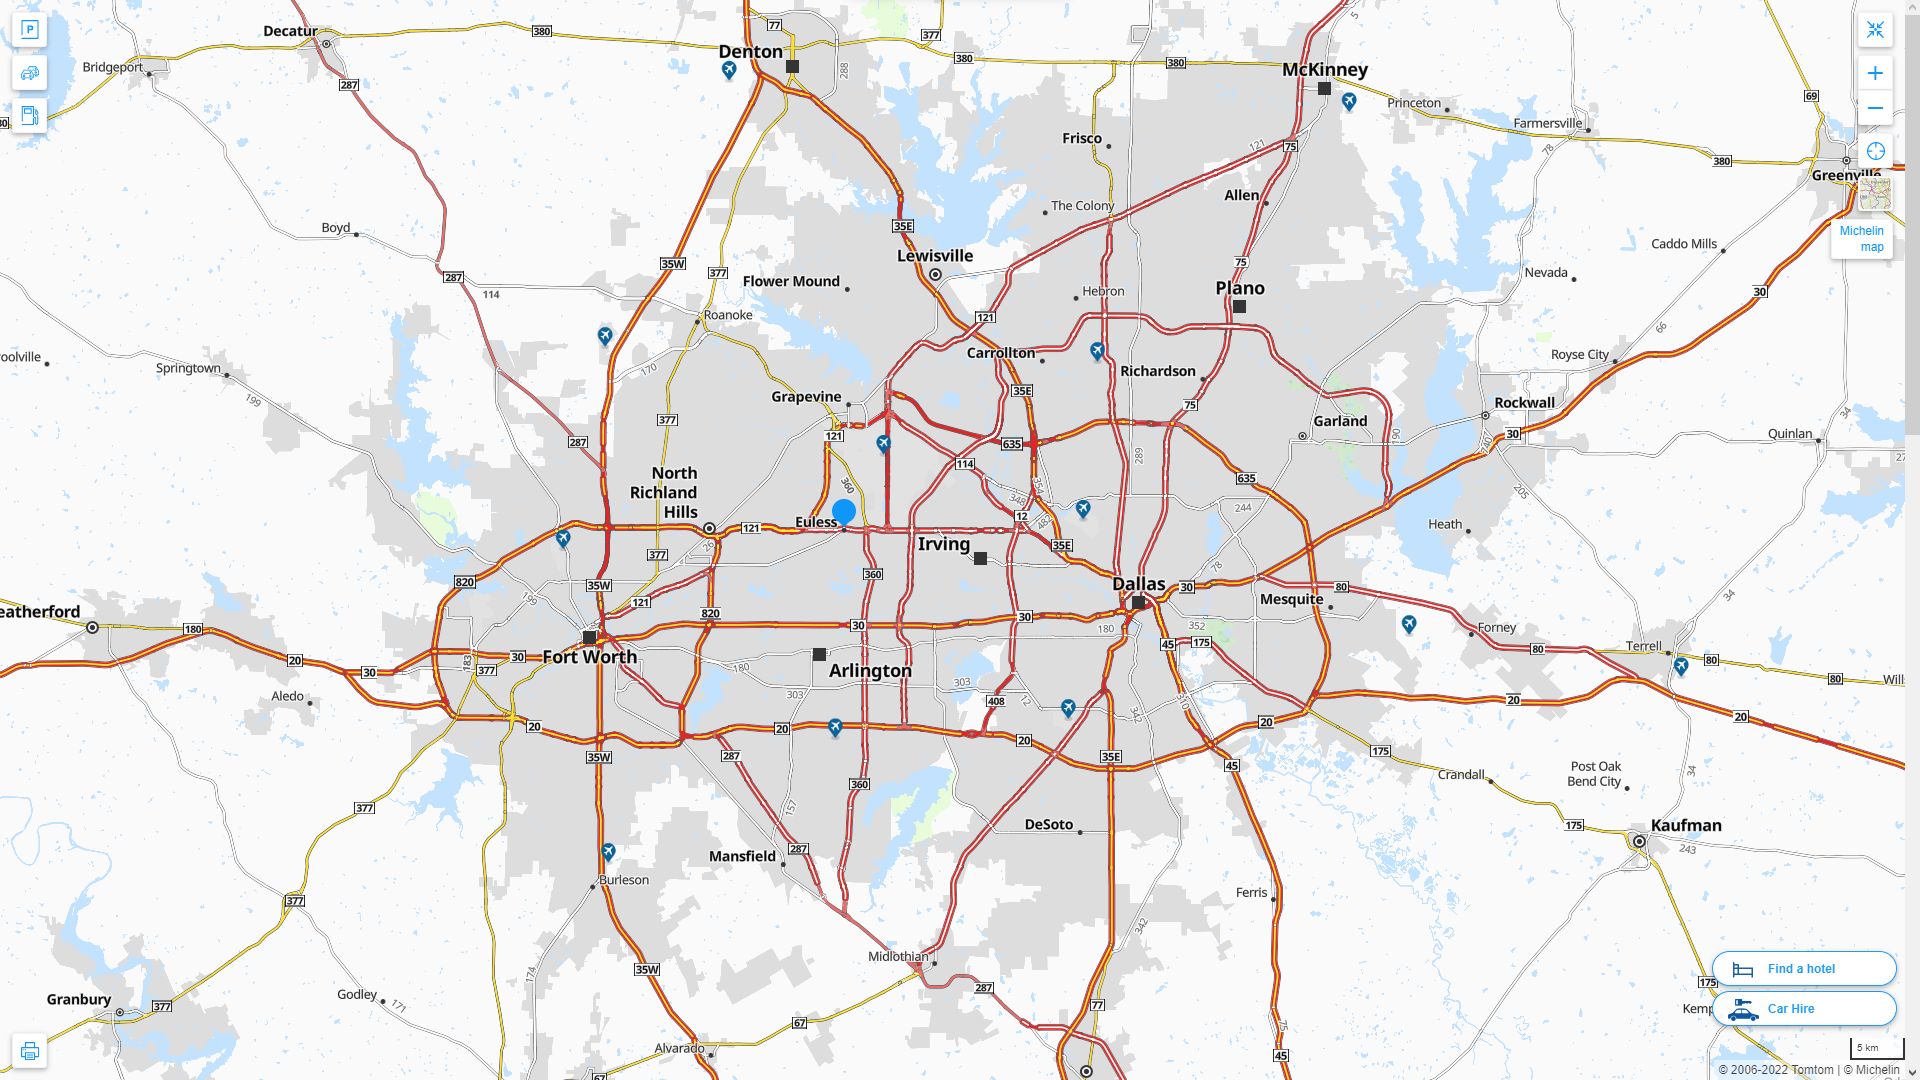 Euless Texas Highway and Road Map